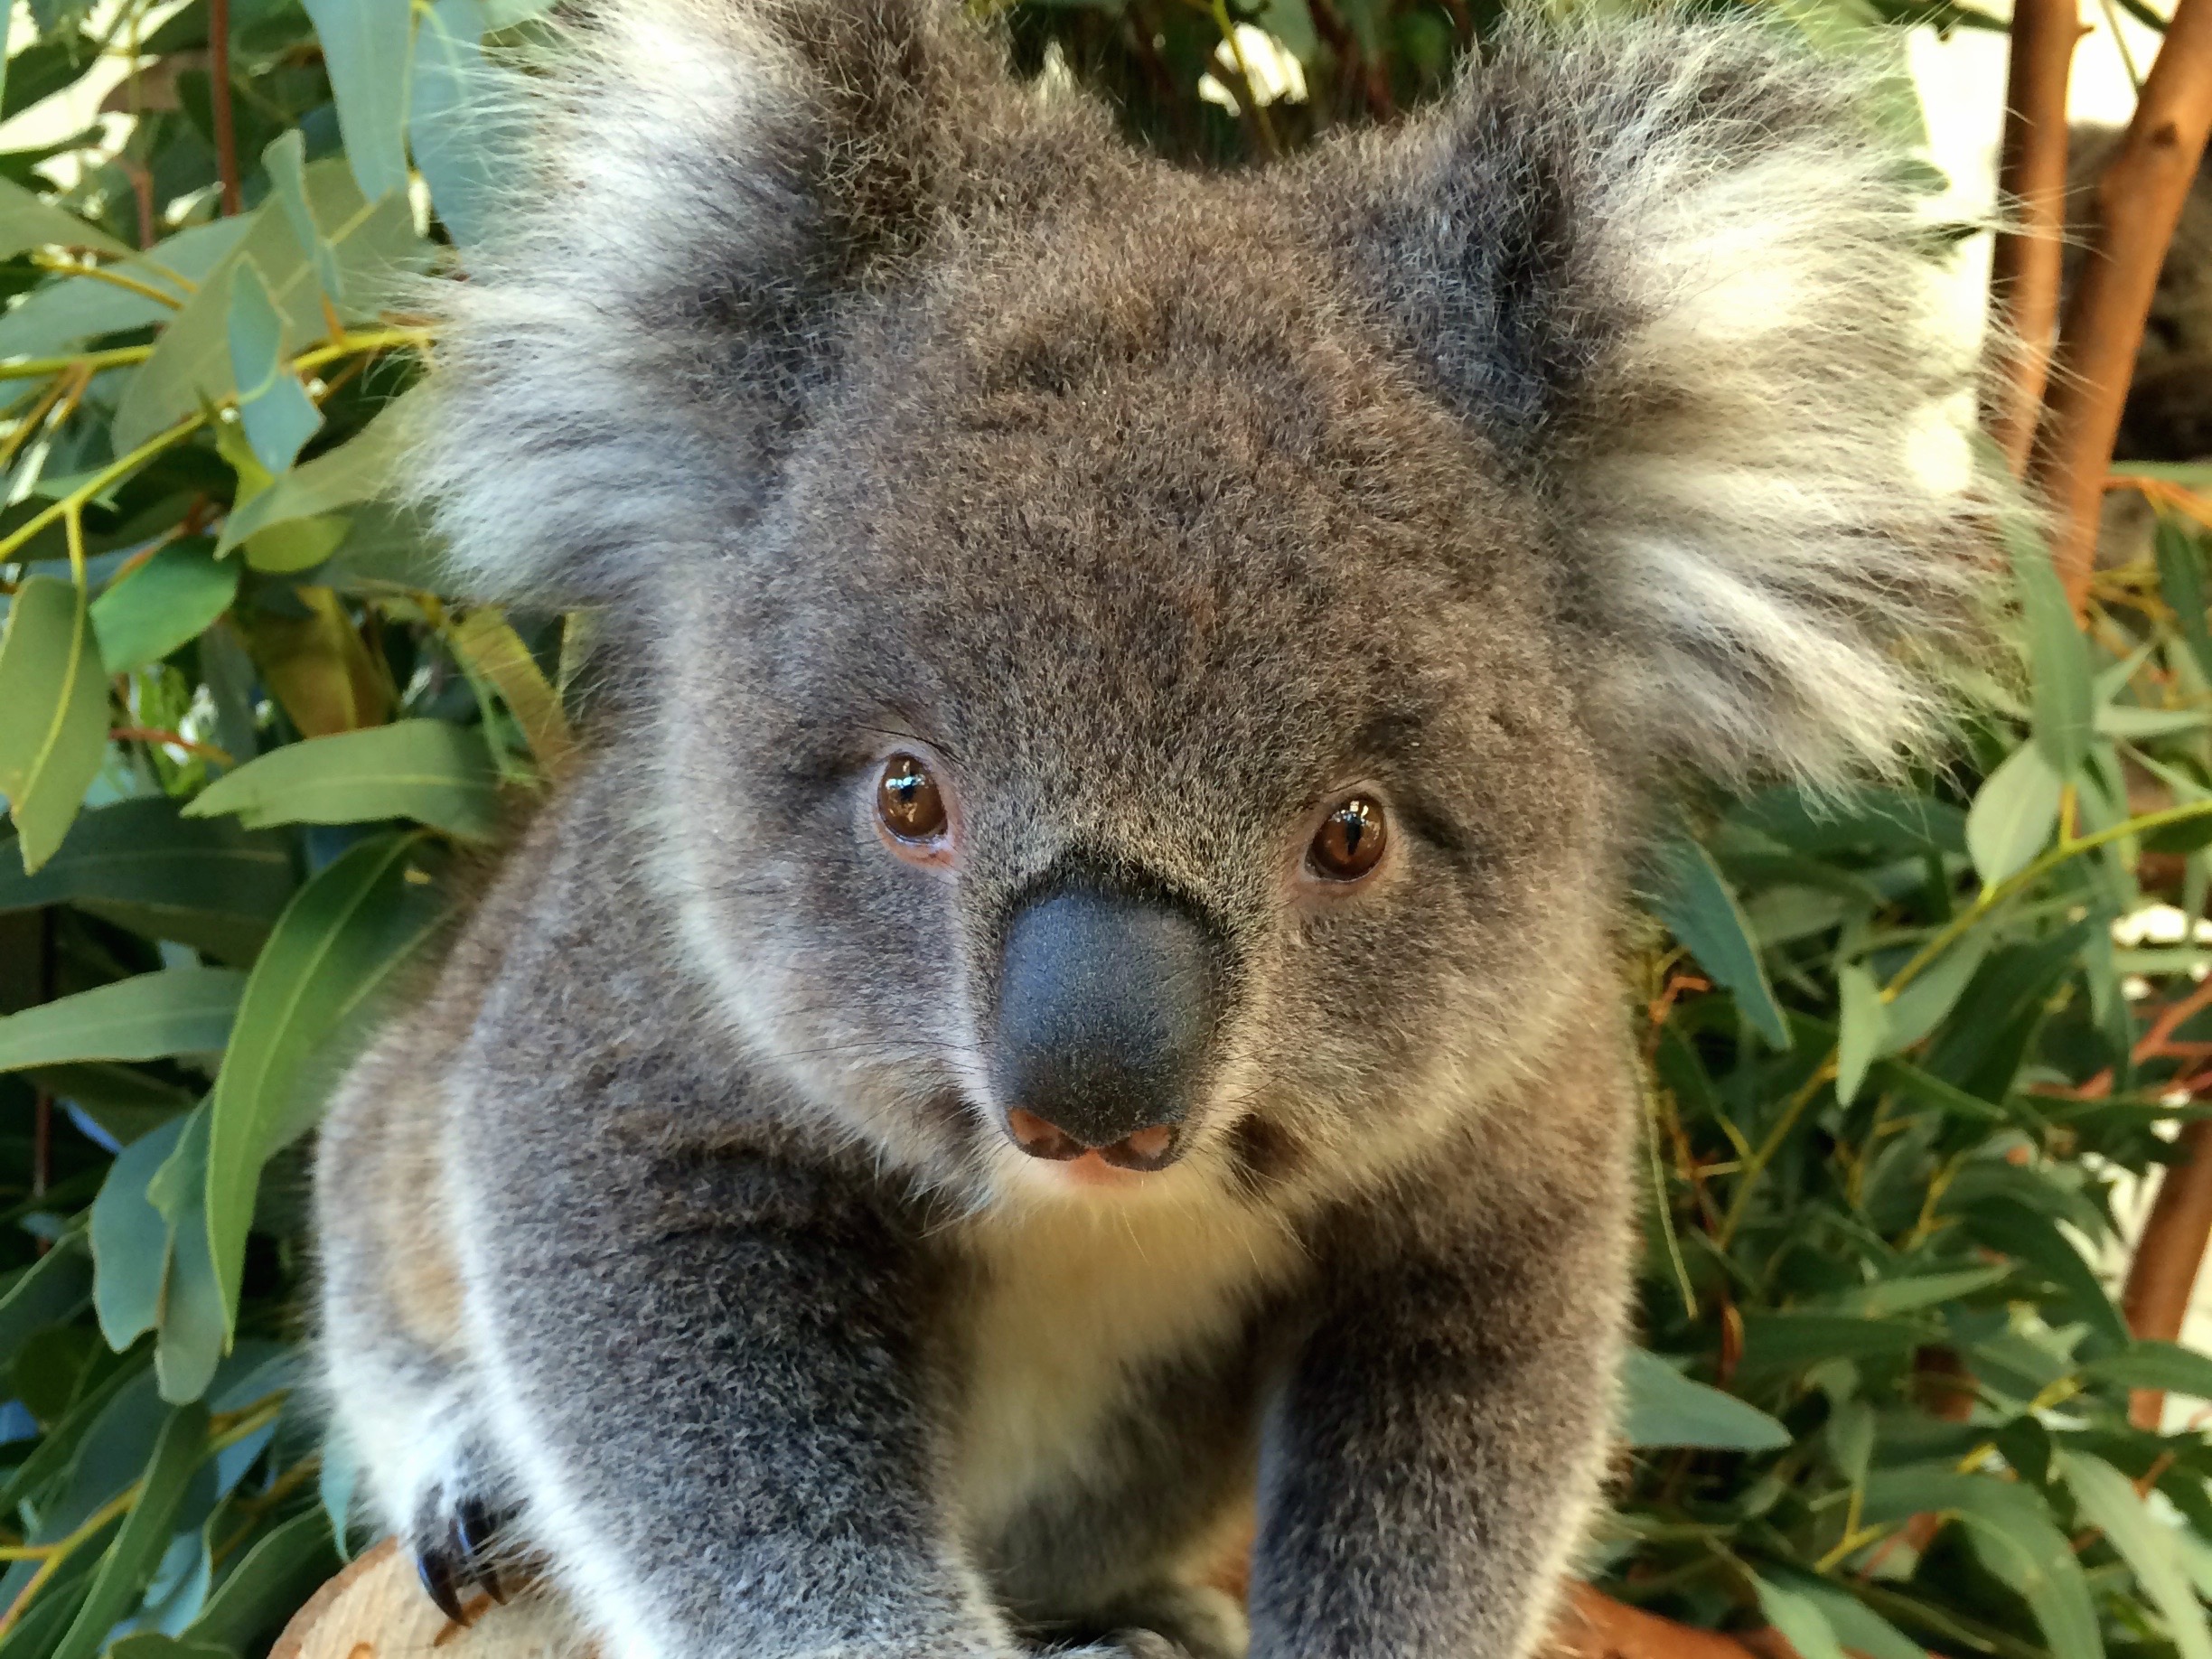 Visit Caversham wildlife park when you book a pass with Sightseeing Pass Australia